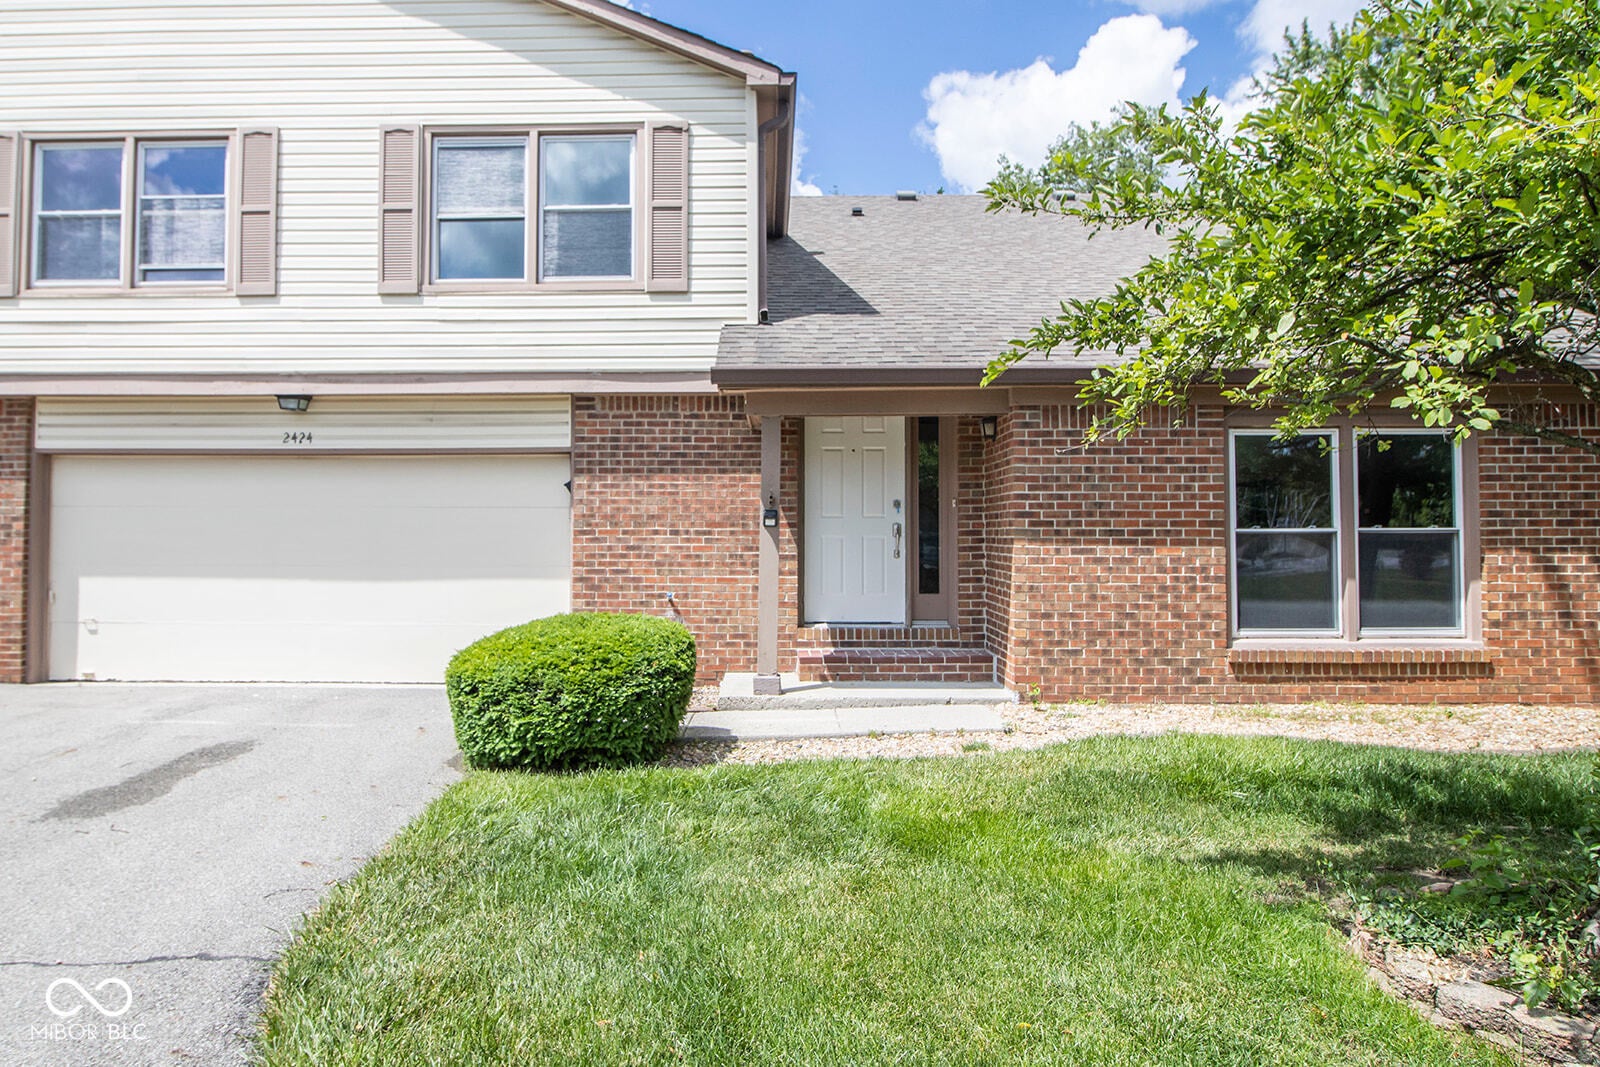 2424 N Willow Way, Indianapolis